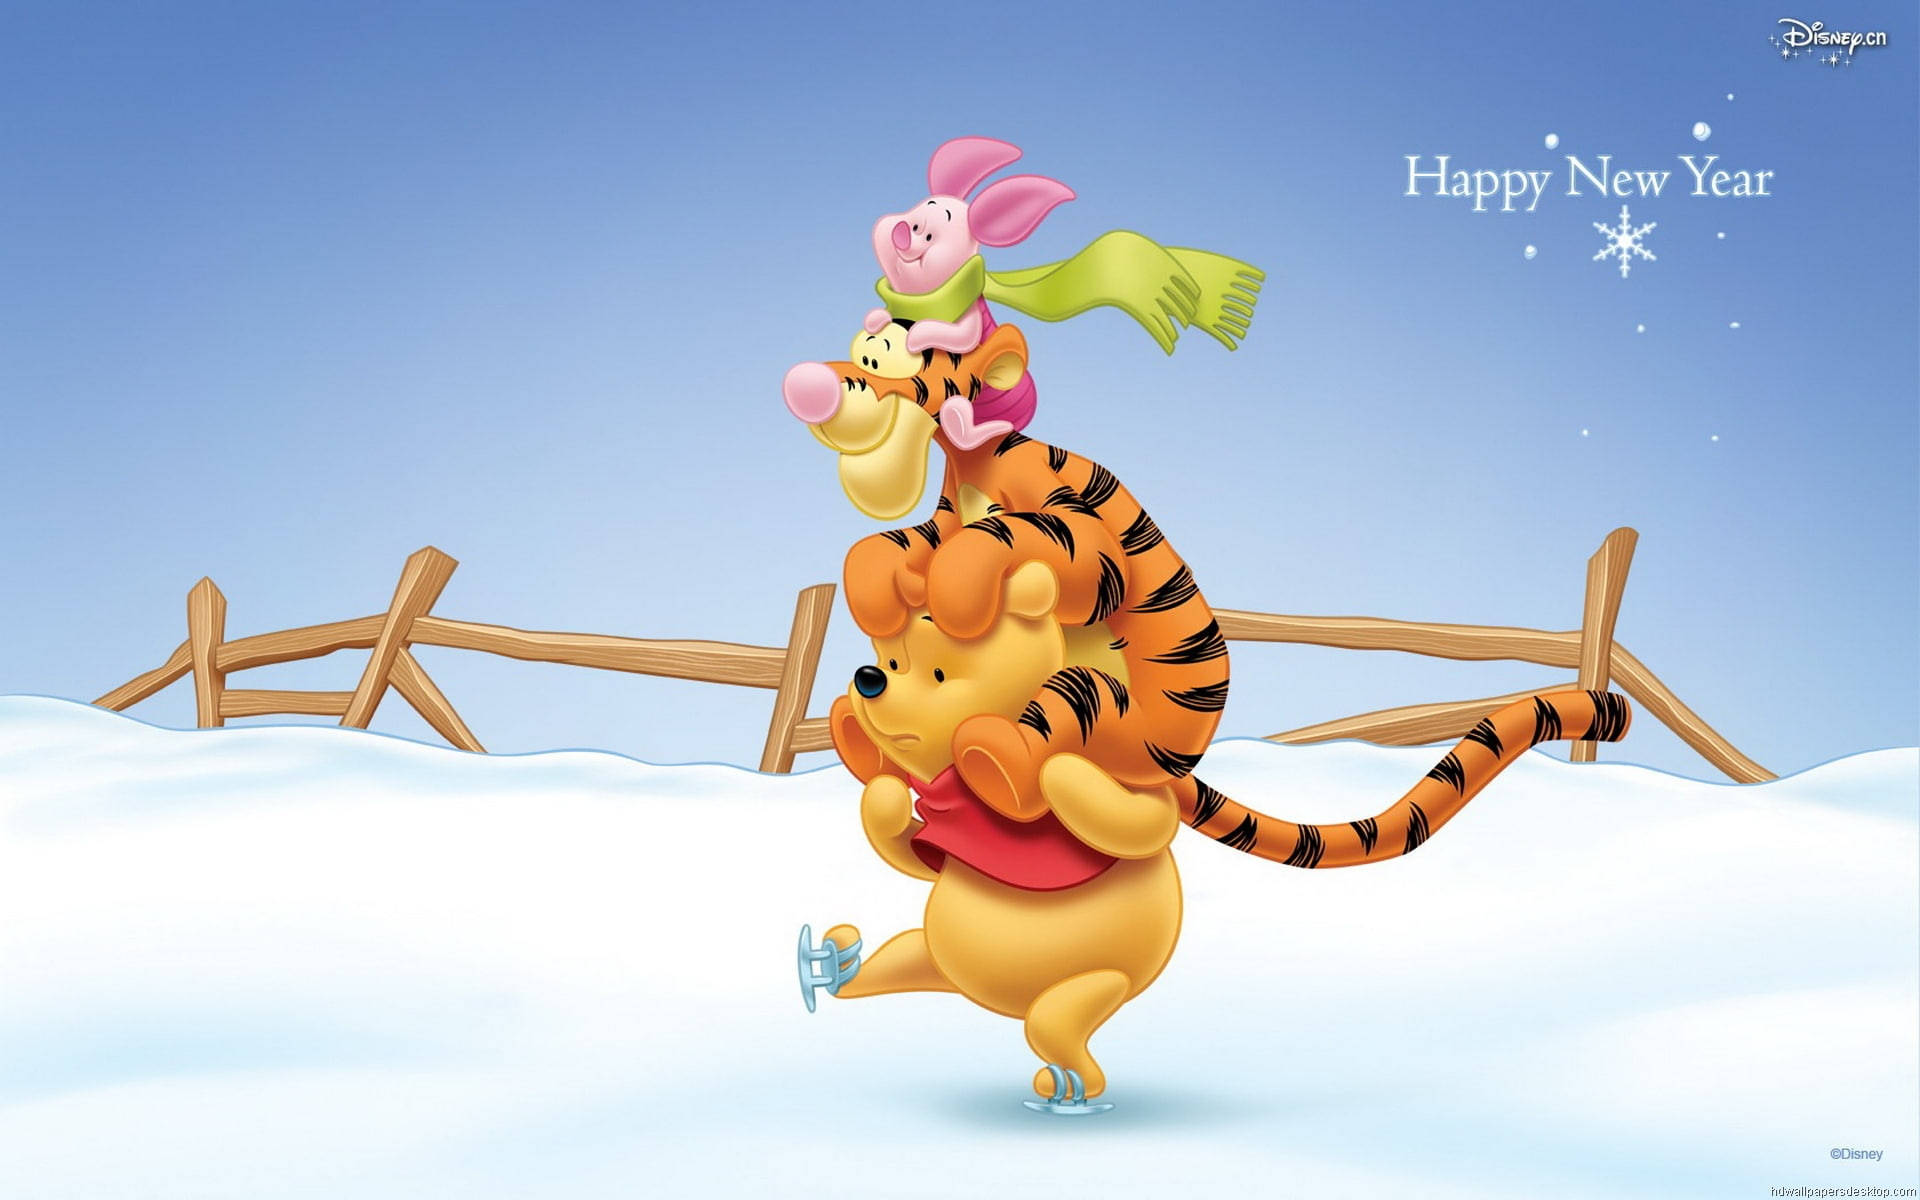 Disney Winnie The Pooh With Tigger And Piglet Wallpaper